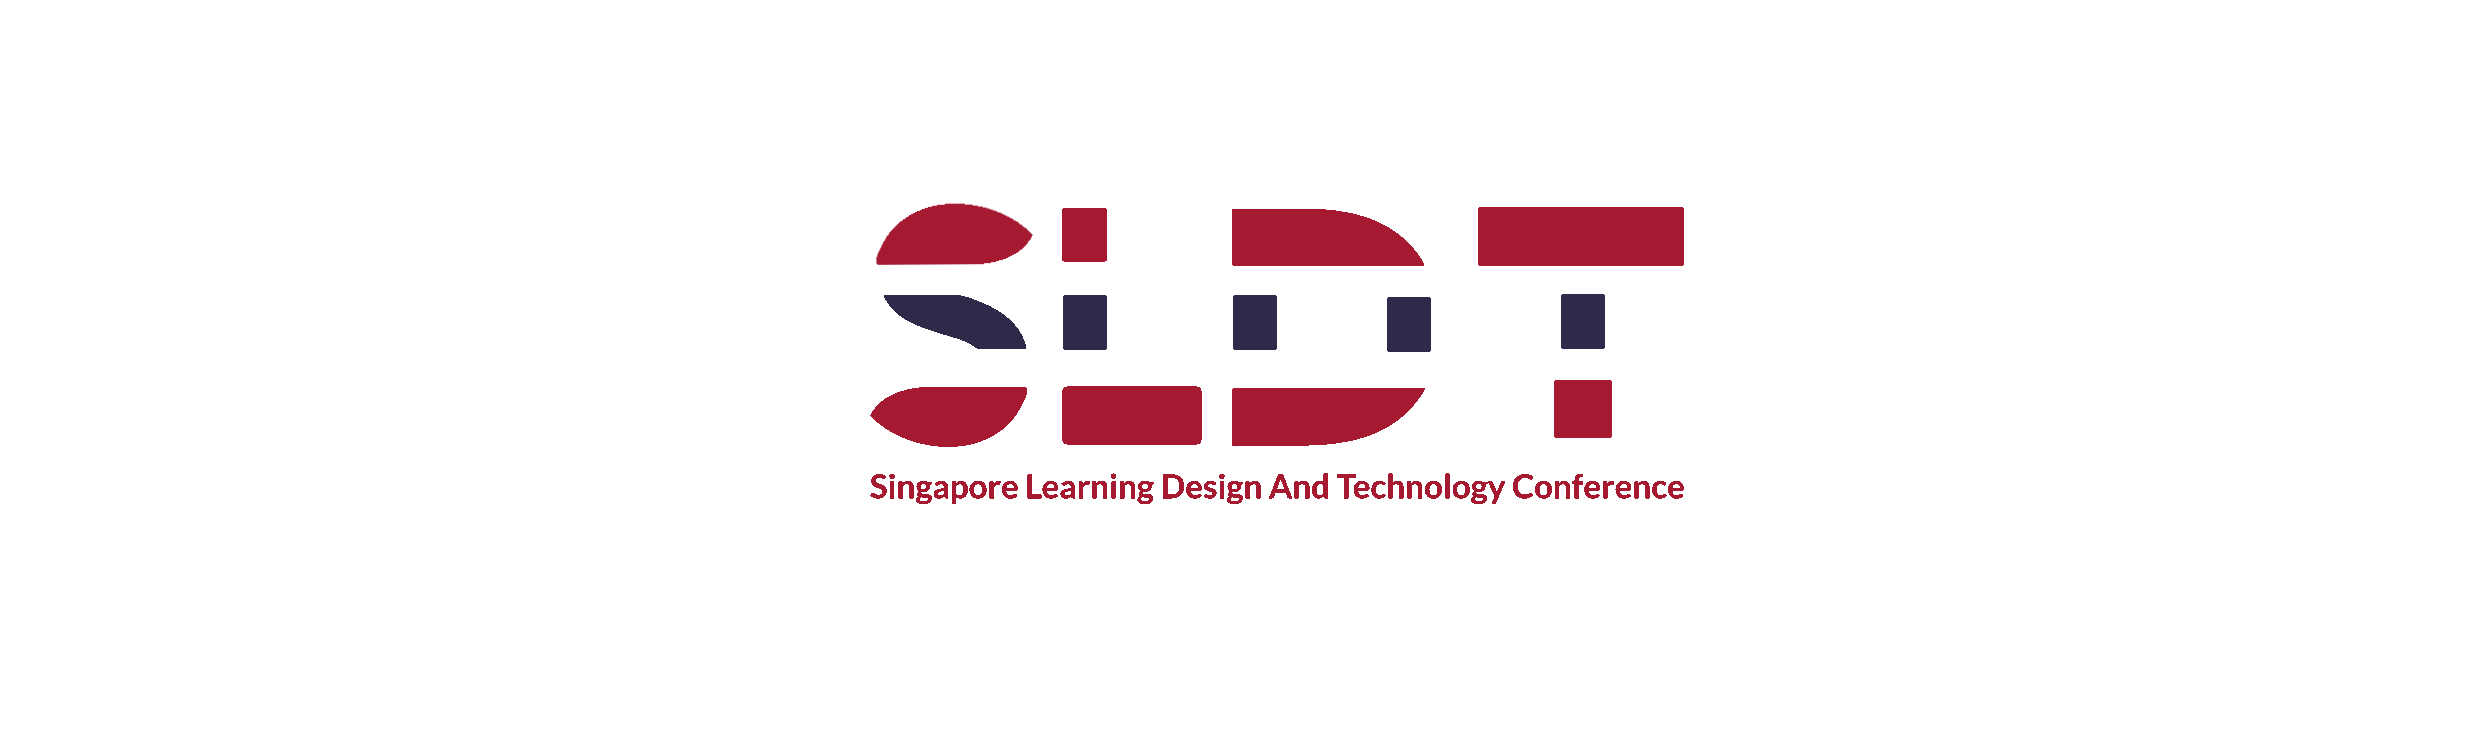 Singapore Learning Design and Technology Conference 2019 (SLDT 2019), Havelock Road, Central, Singapore